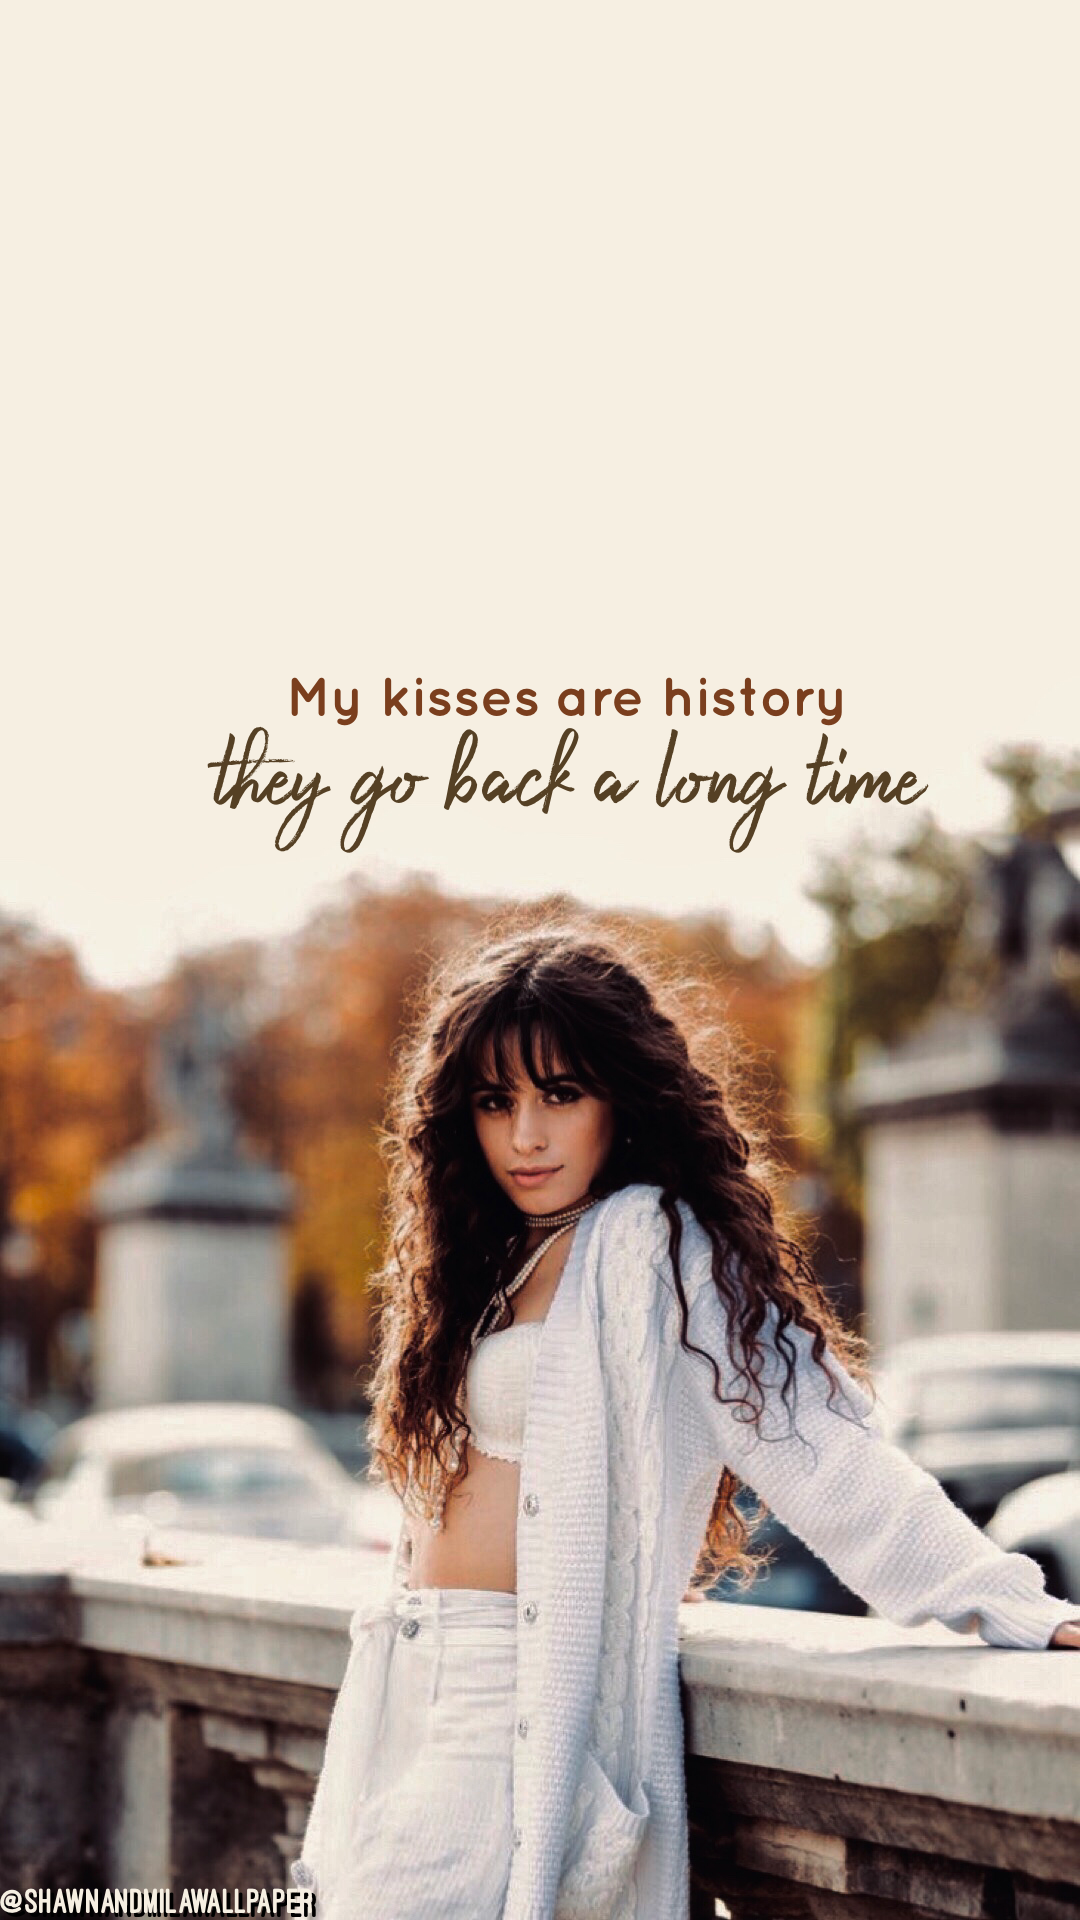 Camila Cabello Soft Grunge Aesthetic Relationship Goals Text